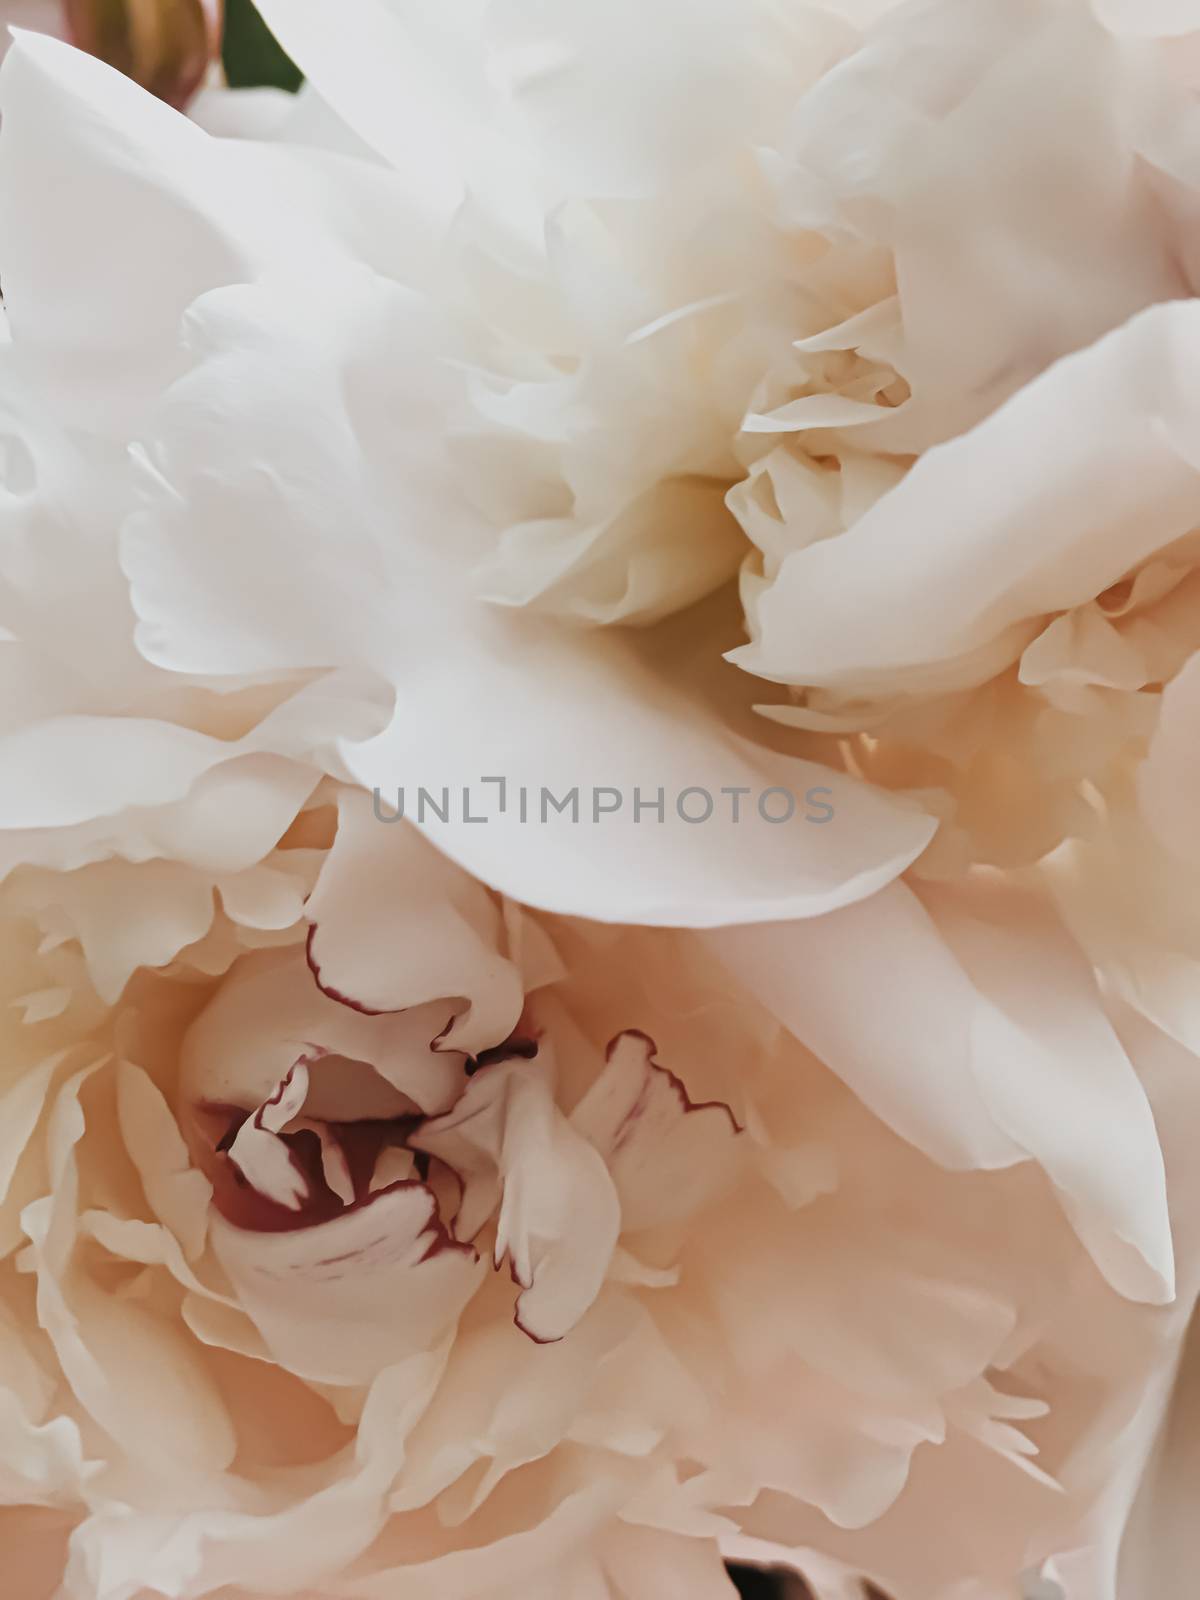 Beige peony flower as abstract floral background for holiday branding design